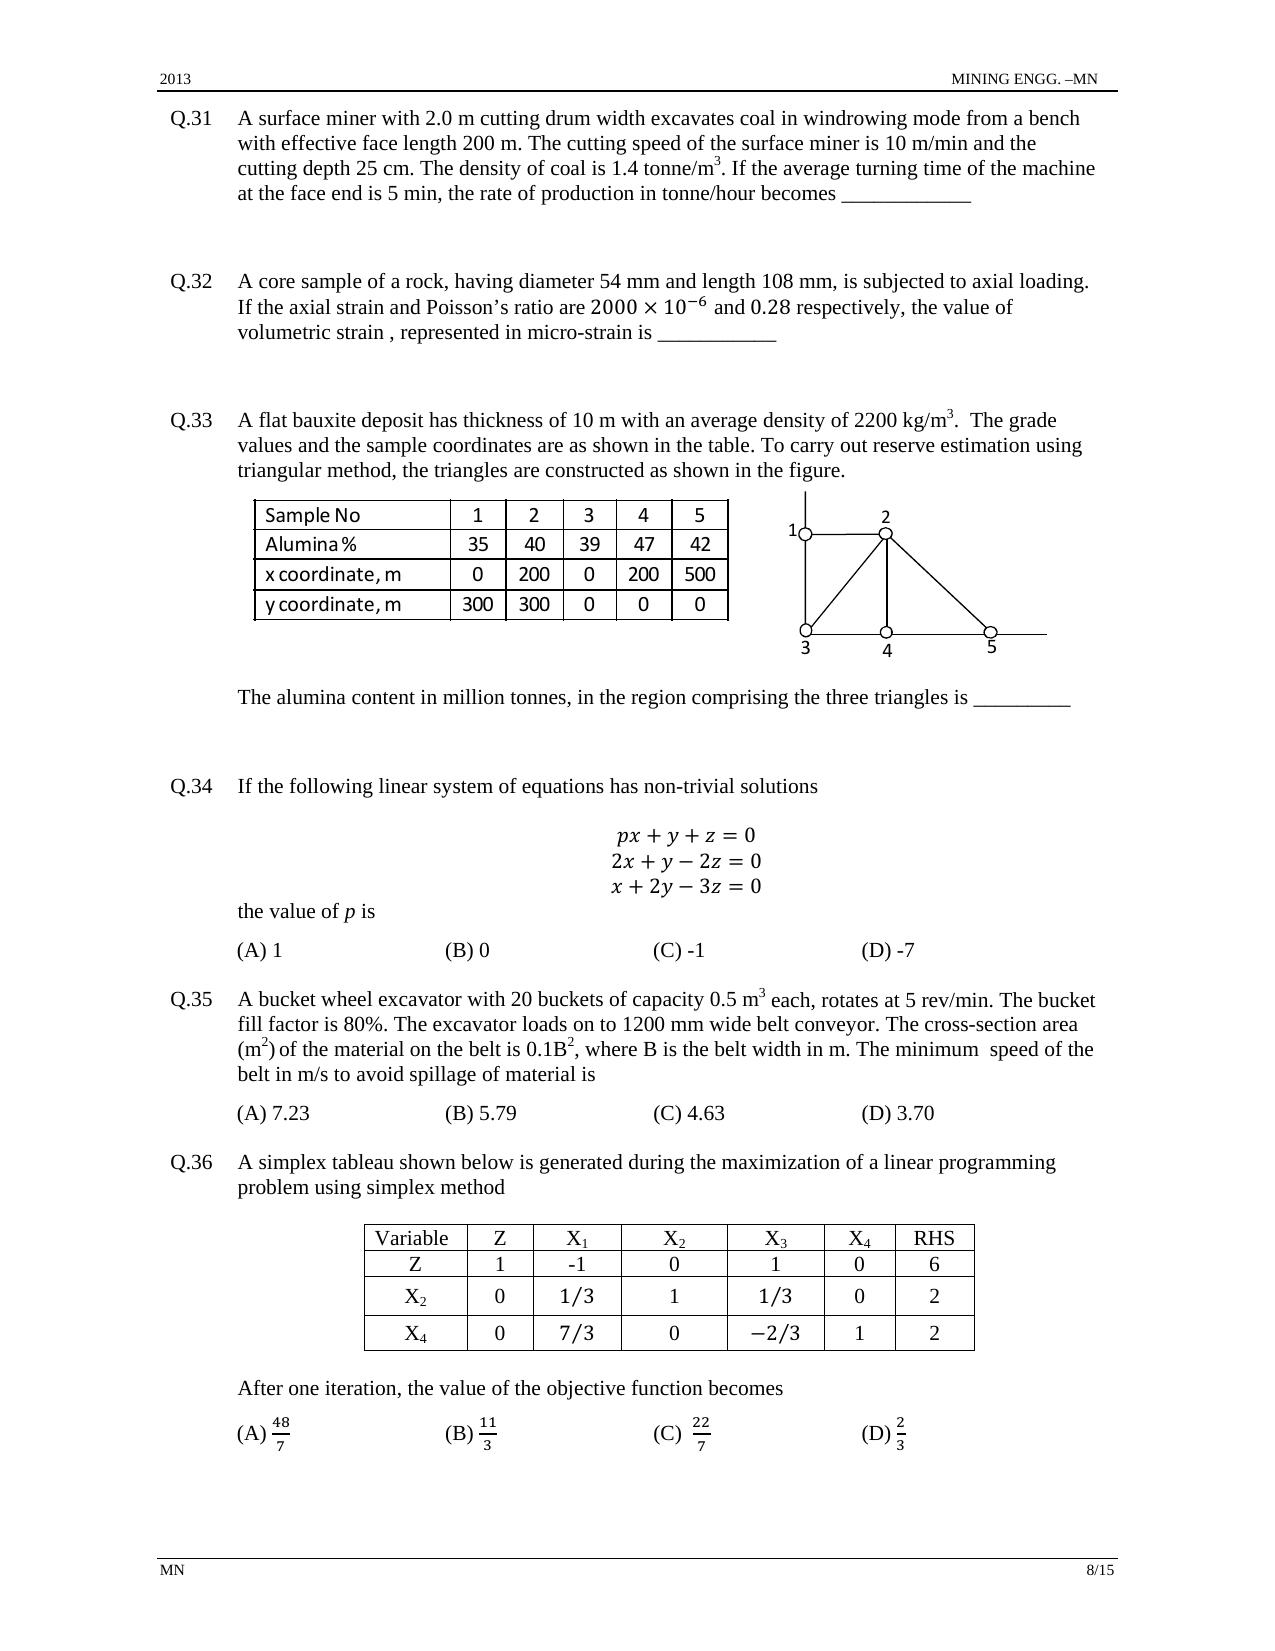 GATE 2013 Mining Engineering (MN) Question Paper with Answer Key - Page 8